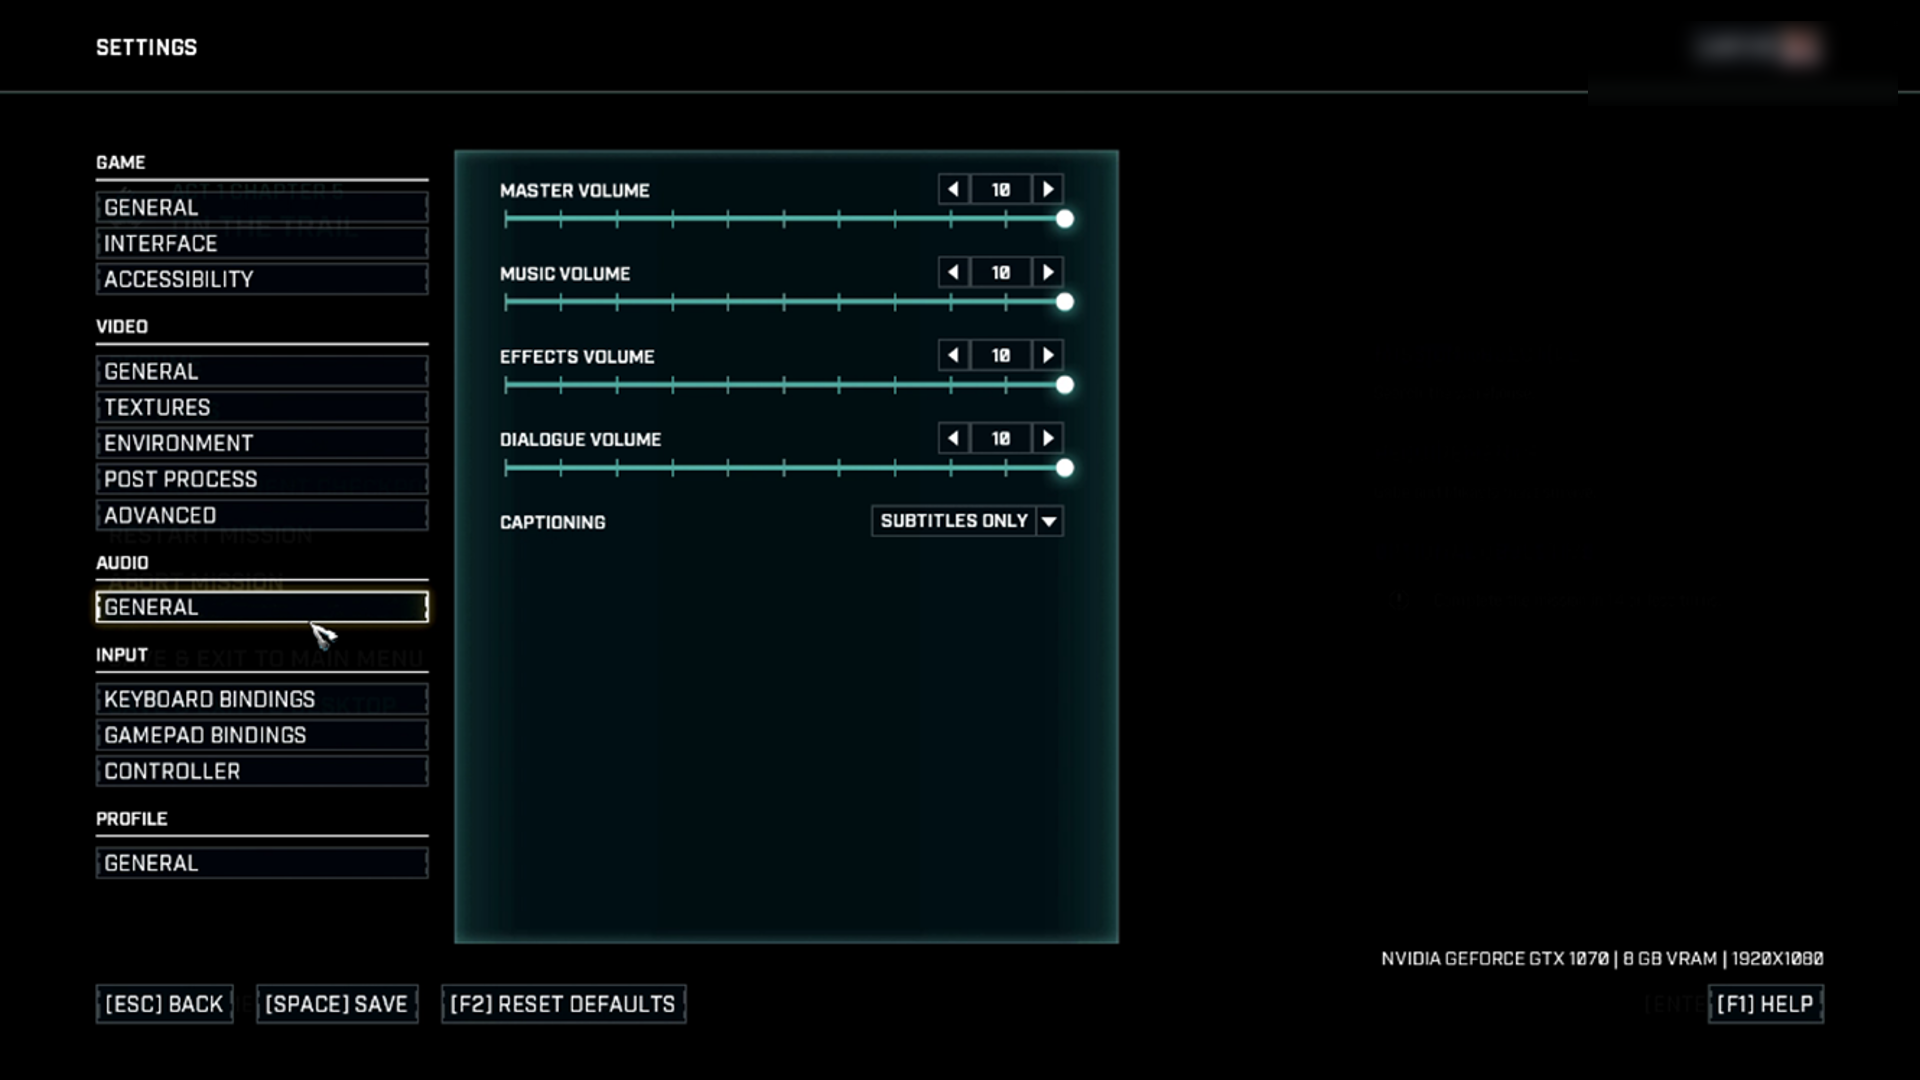 Gears Tactics Audio Settings. There are four sliders for different volume controls. The tab for controlling the slider is bright white against a dark blue background.